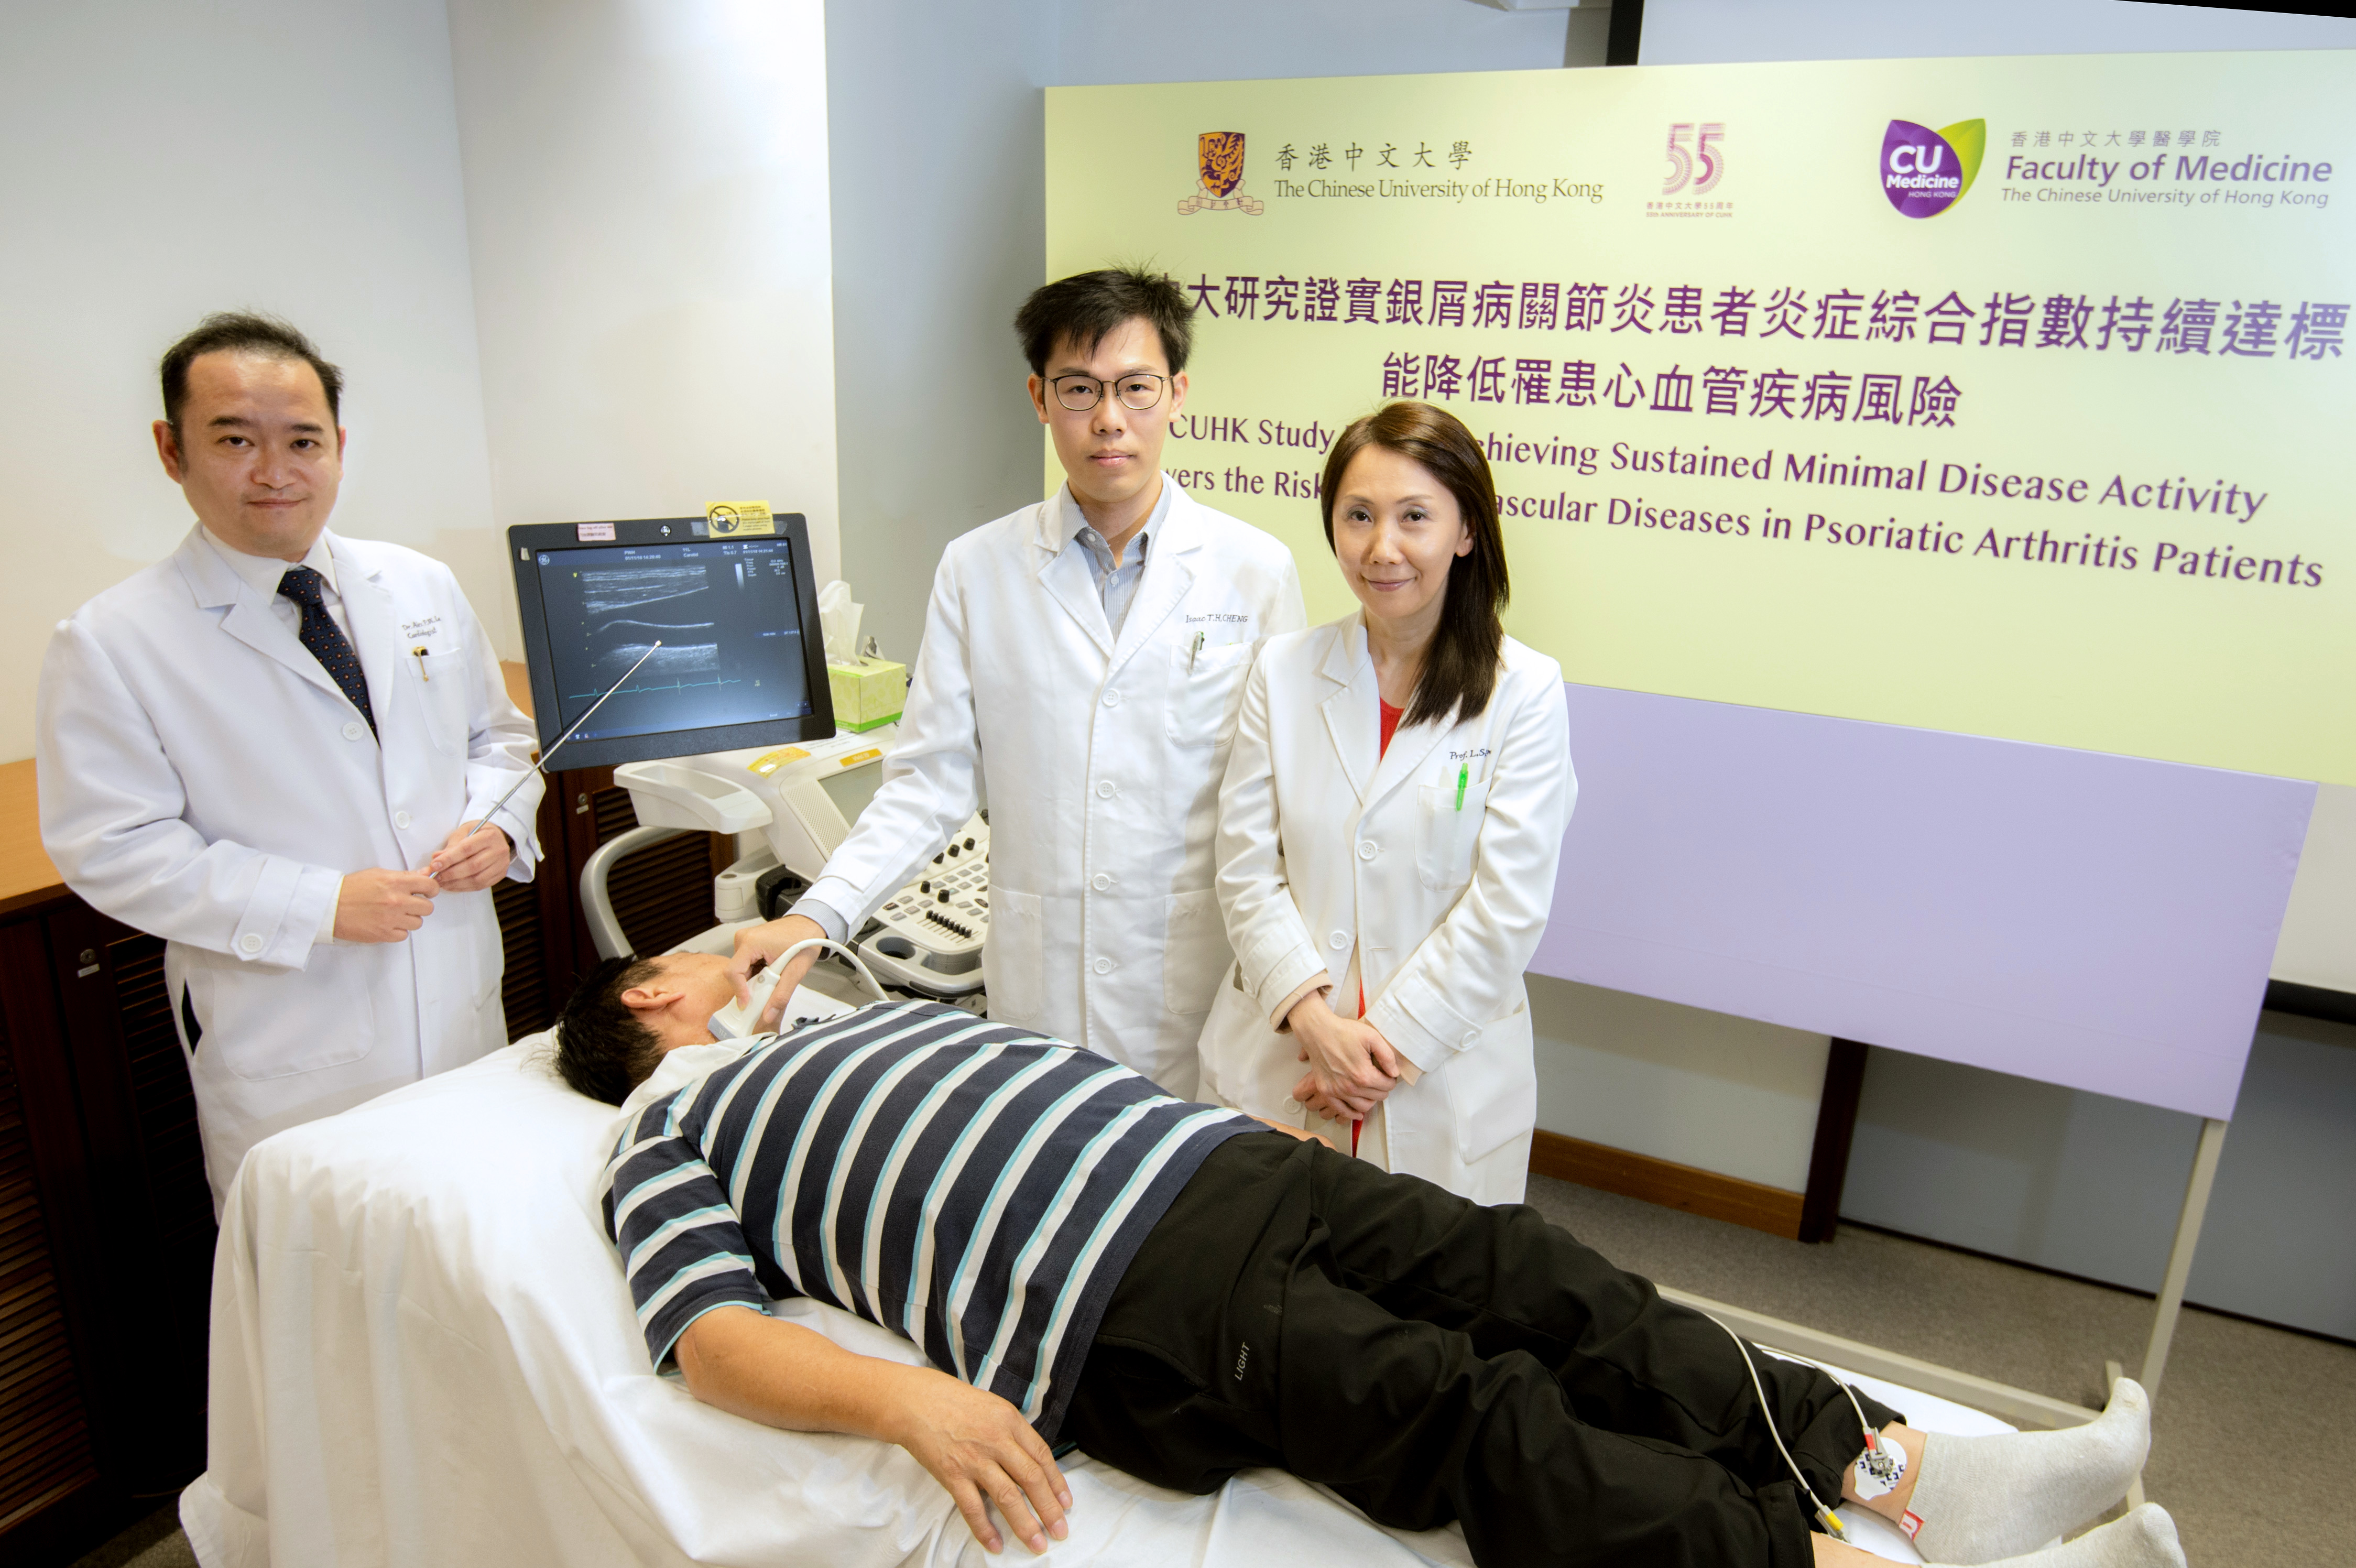 From left: Dr. Alex Pui Wai LEE, Division of Cardiology; Mr. Isaac CHENG and Professor Lai Shan TAM, Division of Rheumatology, Department of Medicine and Therapeutics, CUHK Medicine